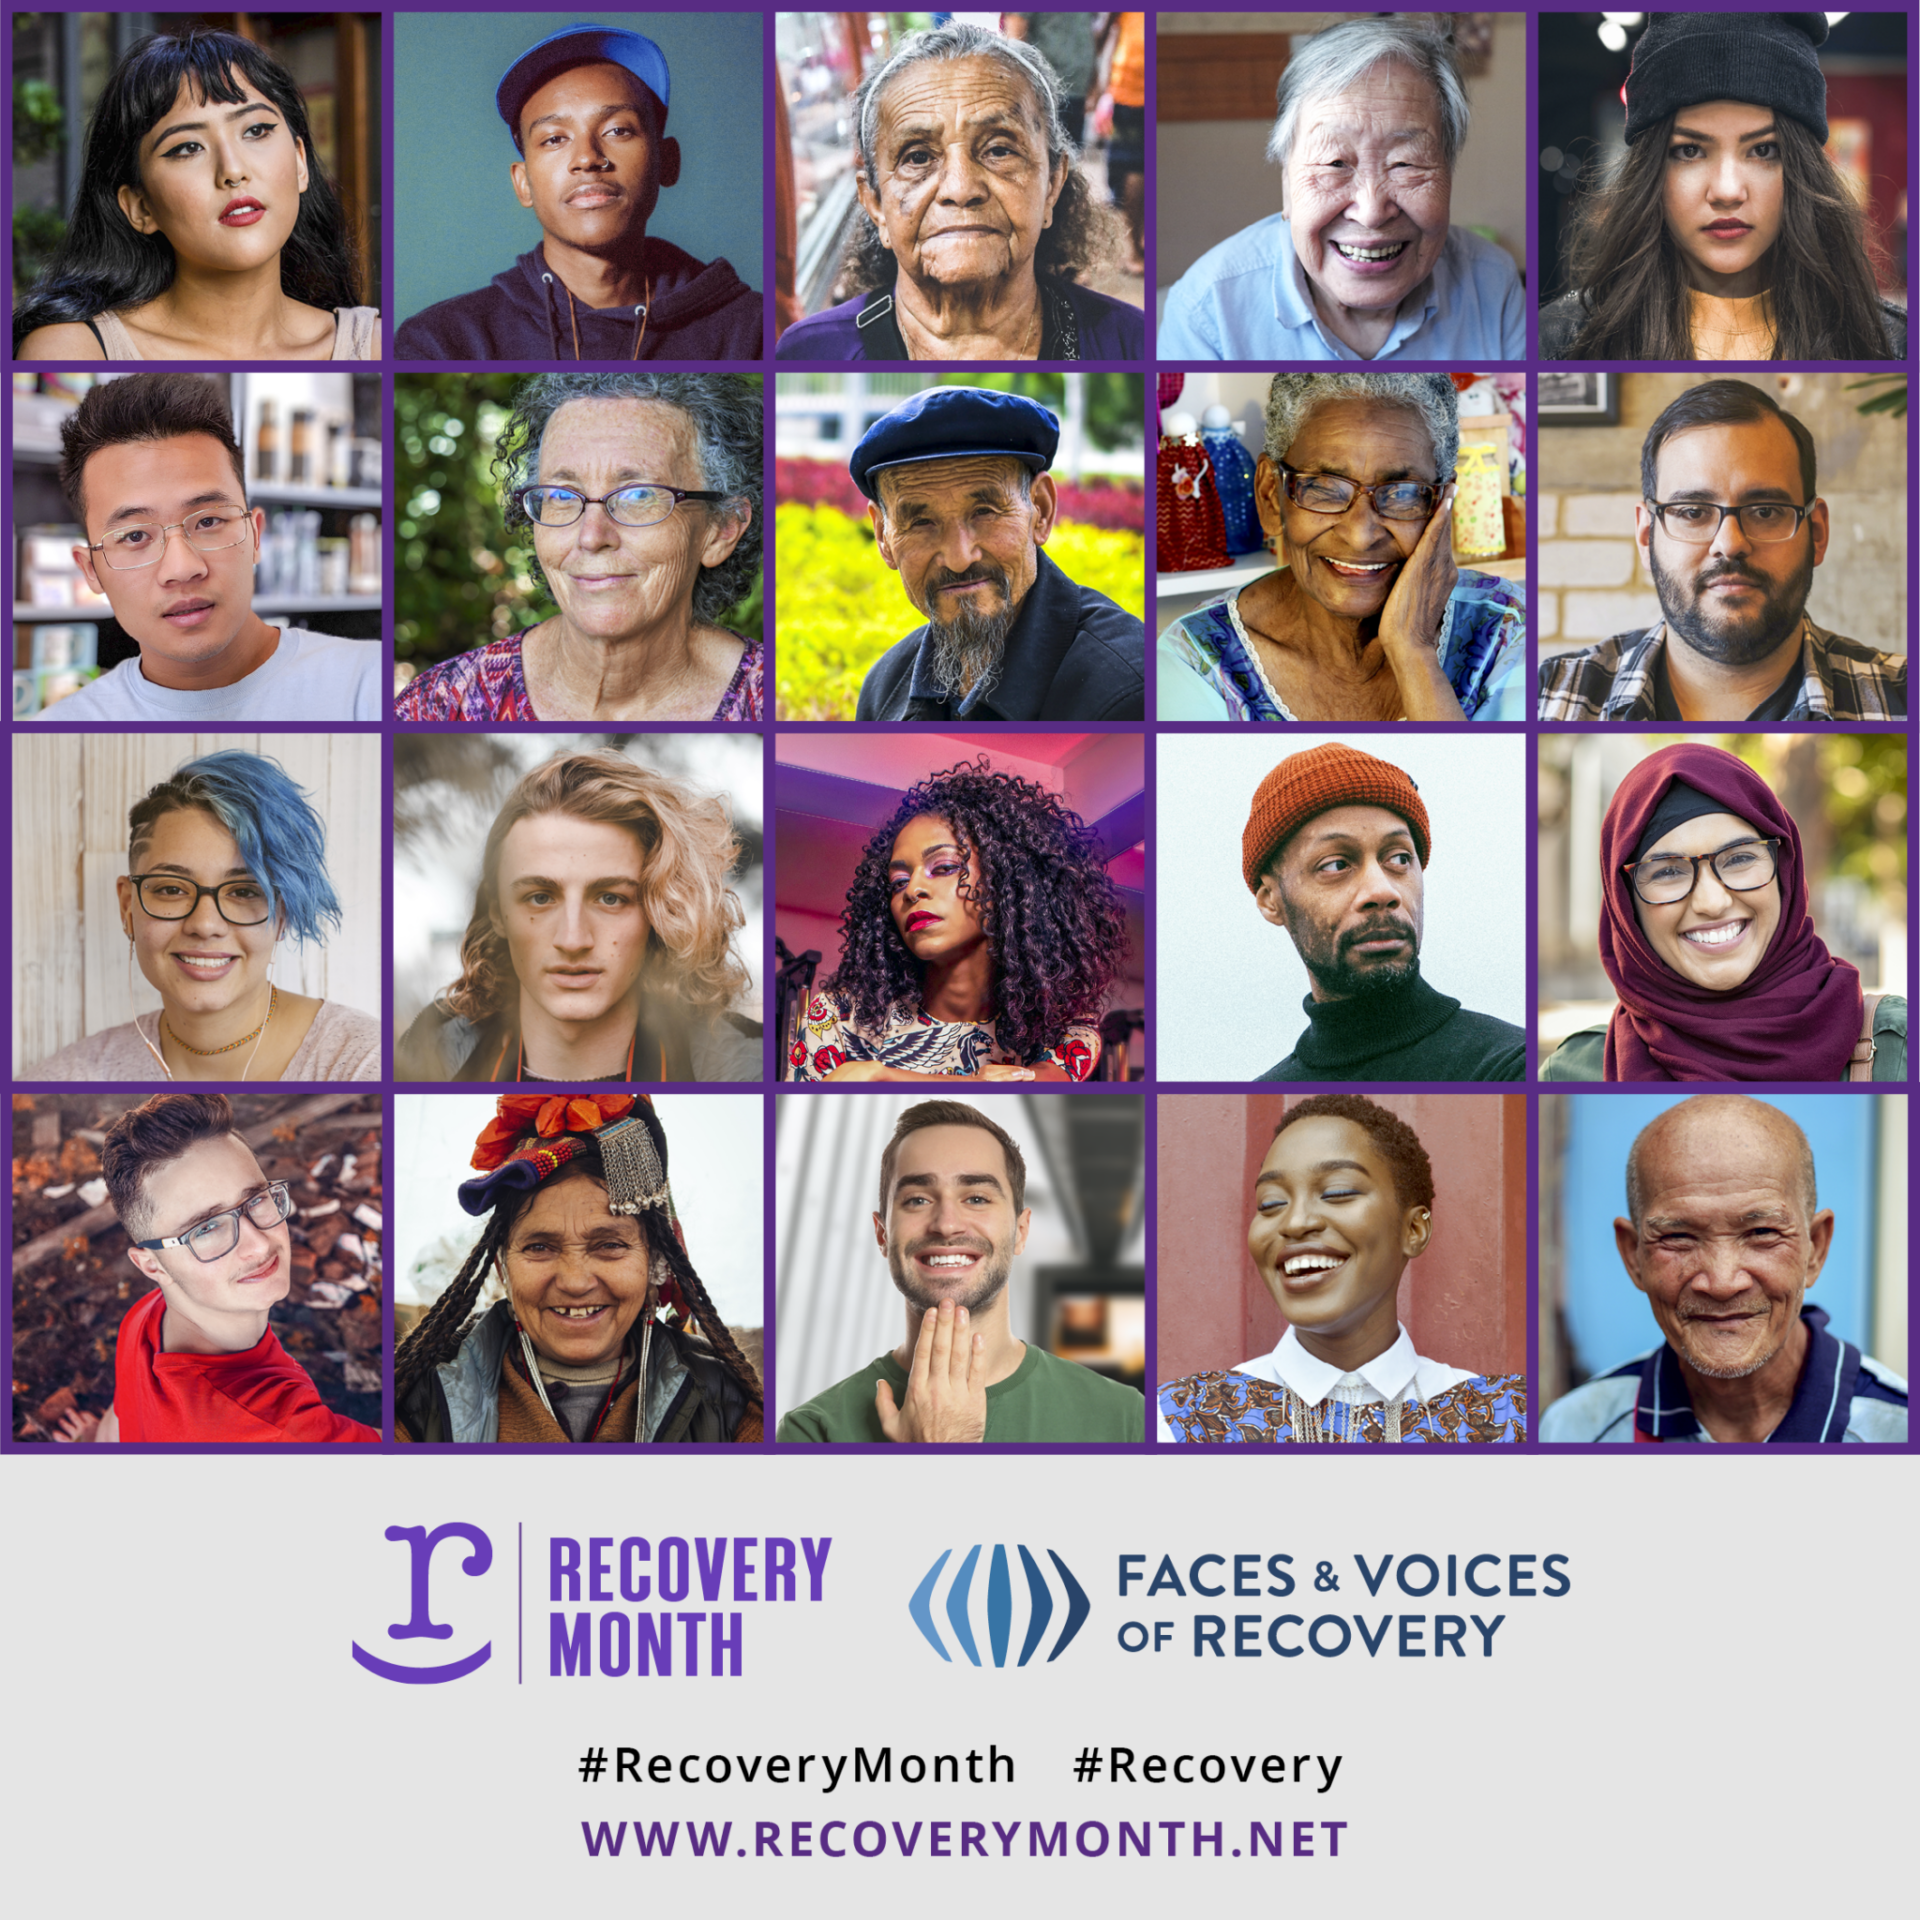 collage of diverse people, with logos Recovery Month, Faces & Voices of Recovery. Text reads: #RecoveryMonth #Recovery www.recoverymonth.net